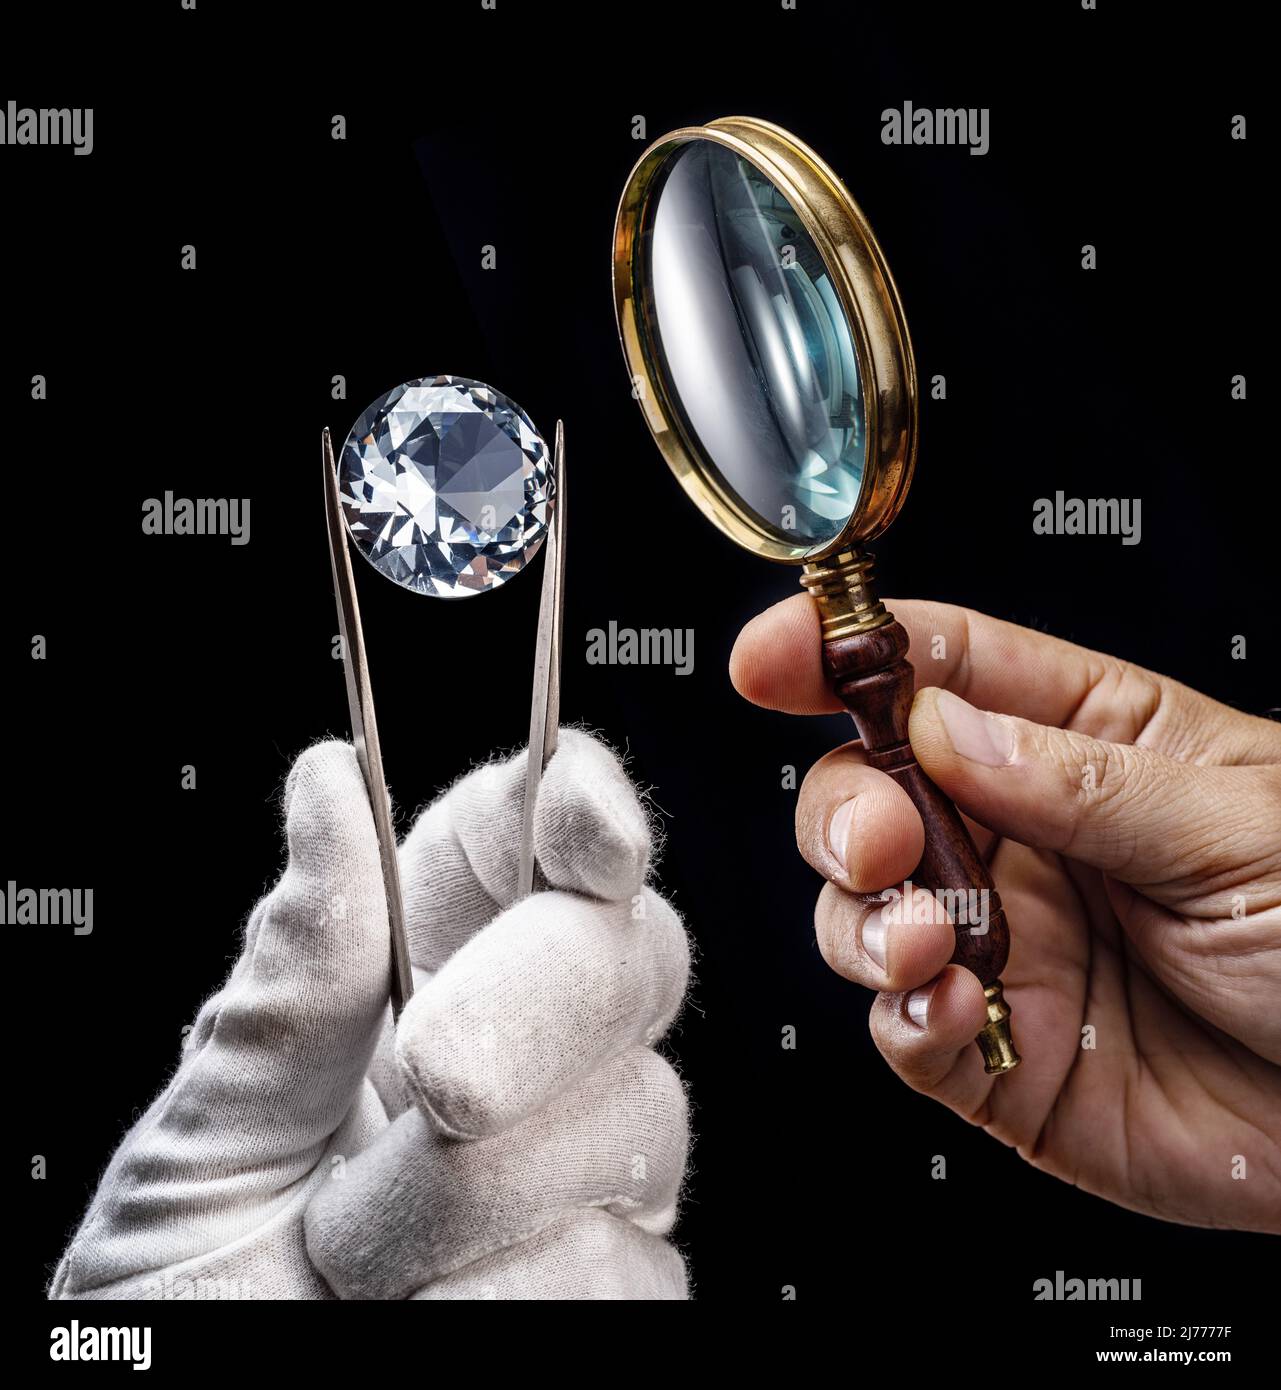 Jewelers magnifying glass. Jewelers Loupe. Stock Photo by